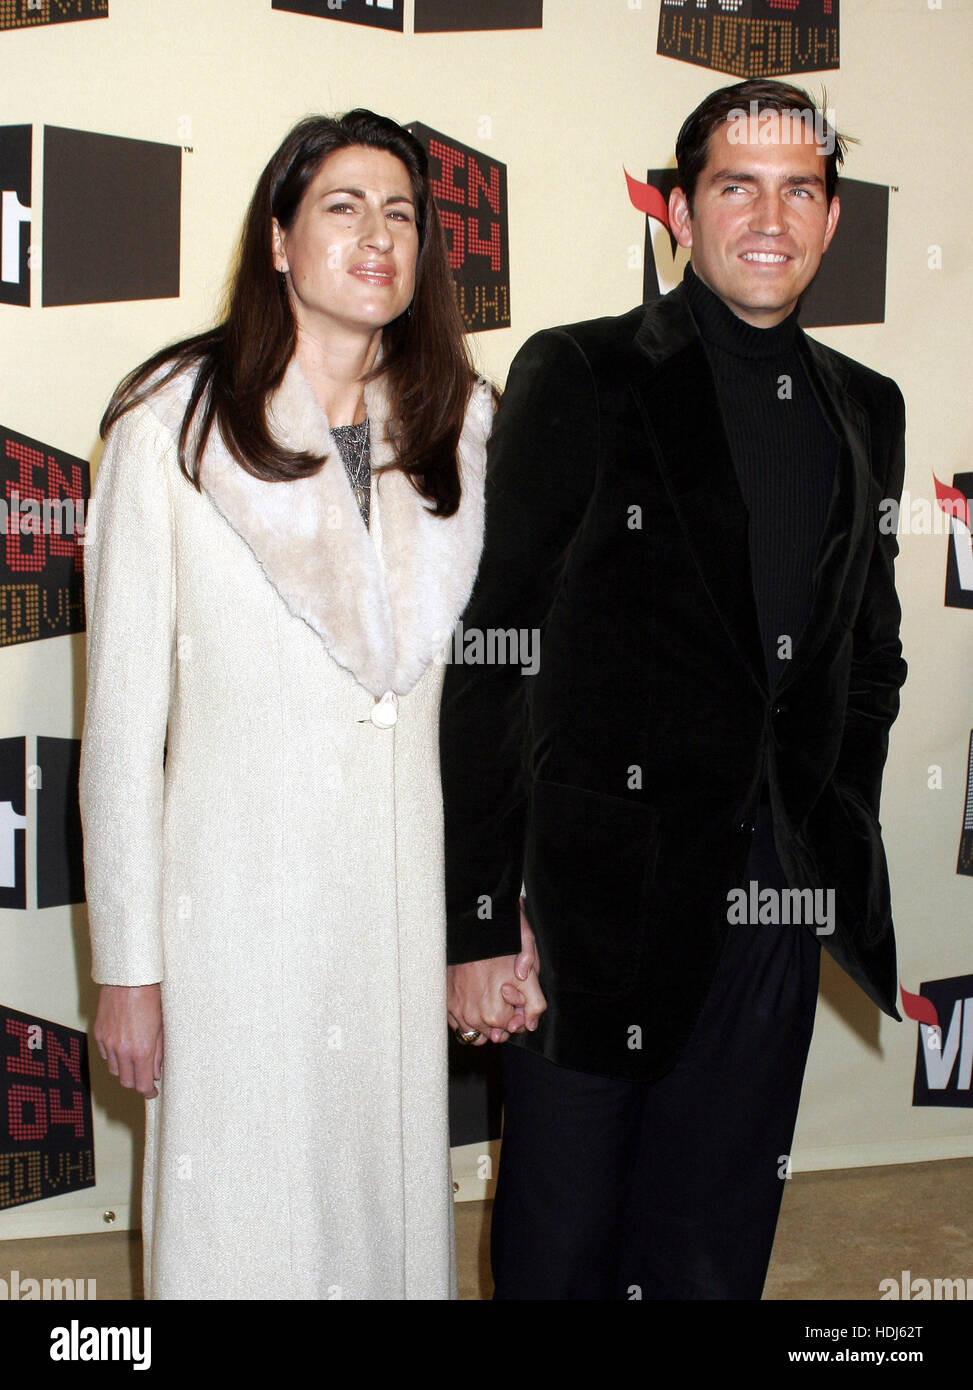 Jim Caviezel and his wife, Kerri Browitt, at VH-1's Big in 2004 award show on December 1, 2004 in Los Angeles. Photo credit: Francis Specker Stock Photo